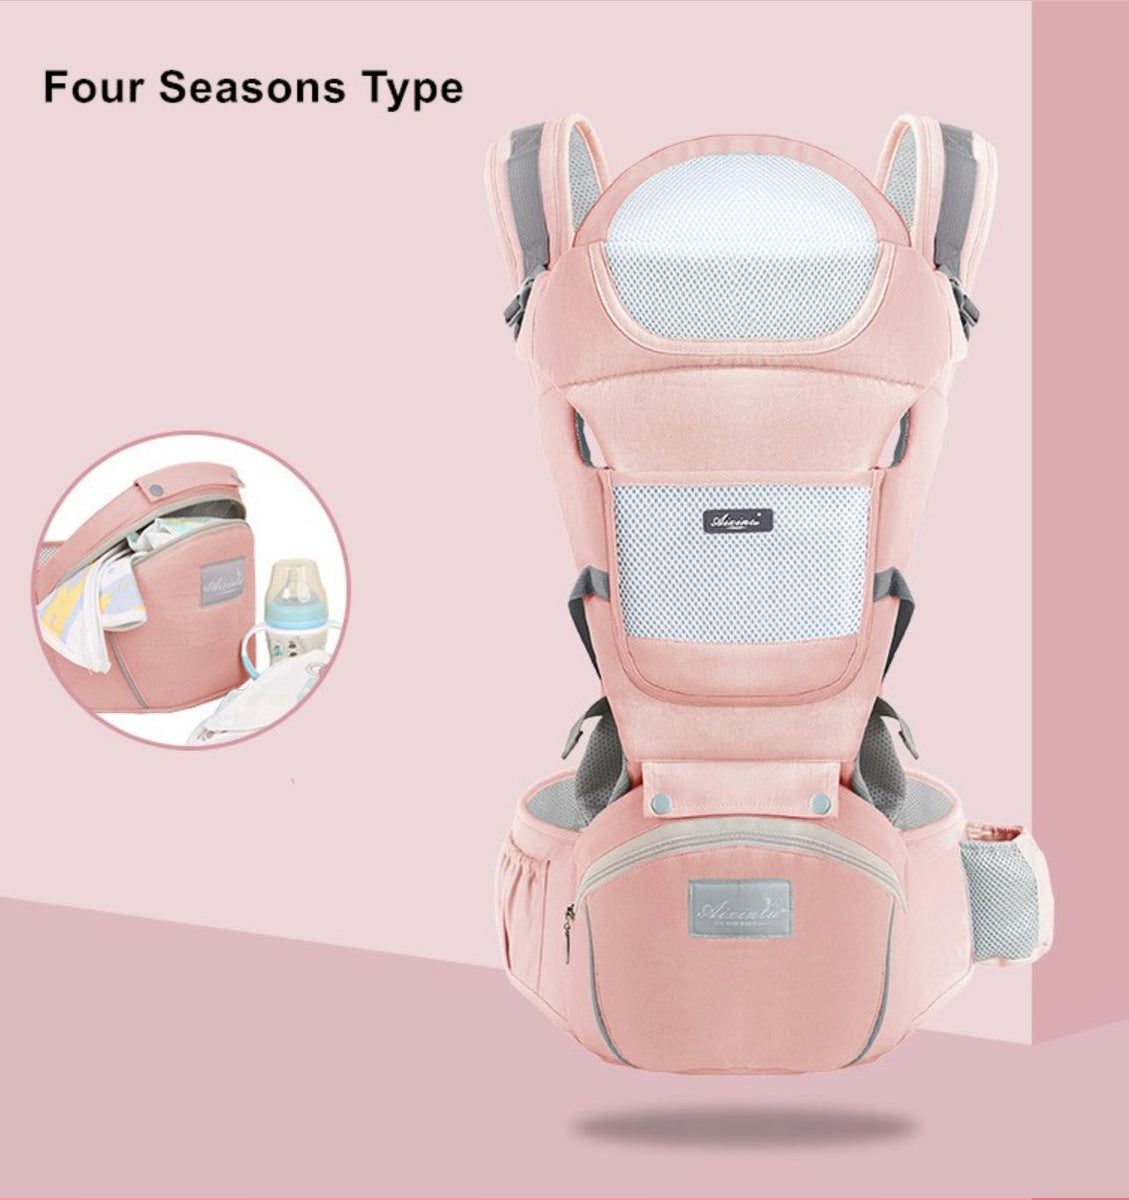 Pumpkin360 Convertible Baby Carrier with Adjustable Straps and Breathable Mesh for Infants and Babies 0-36 months